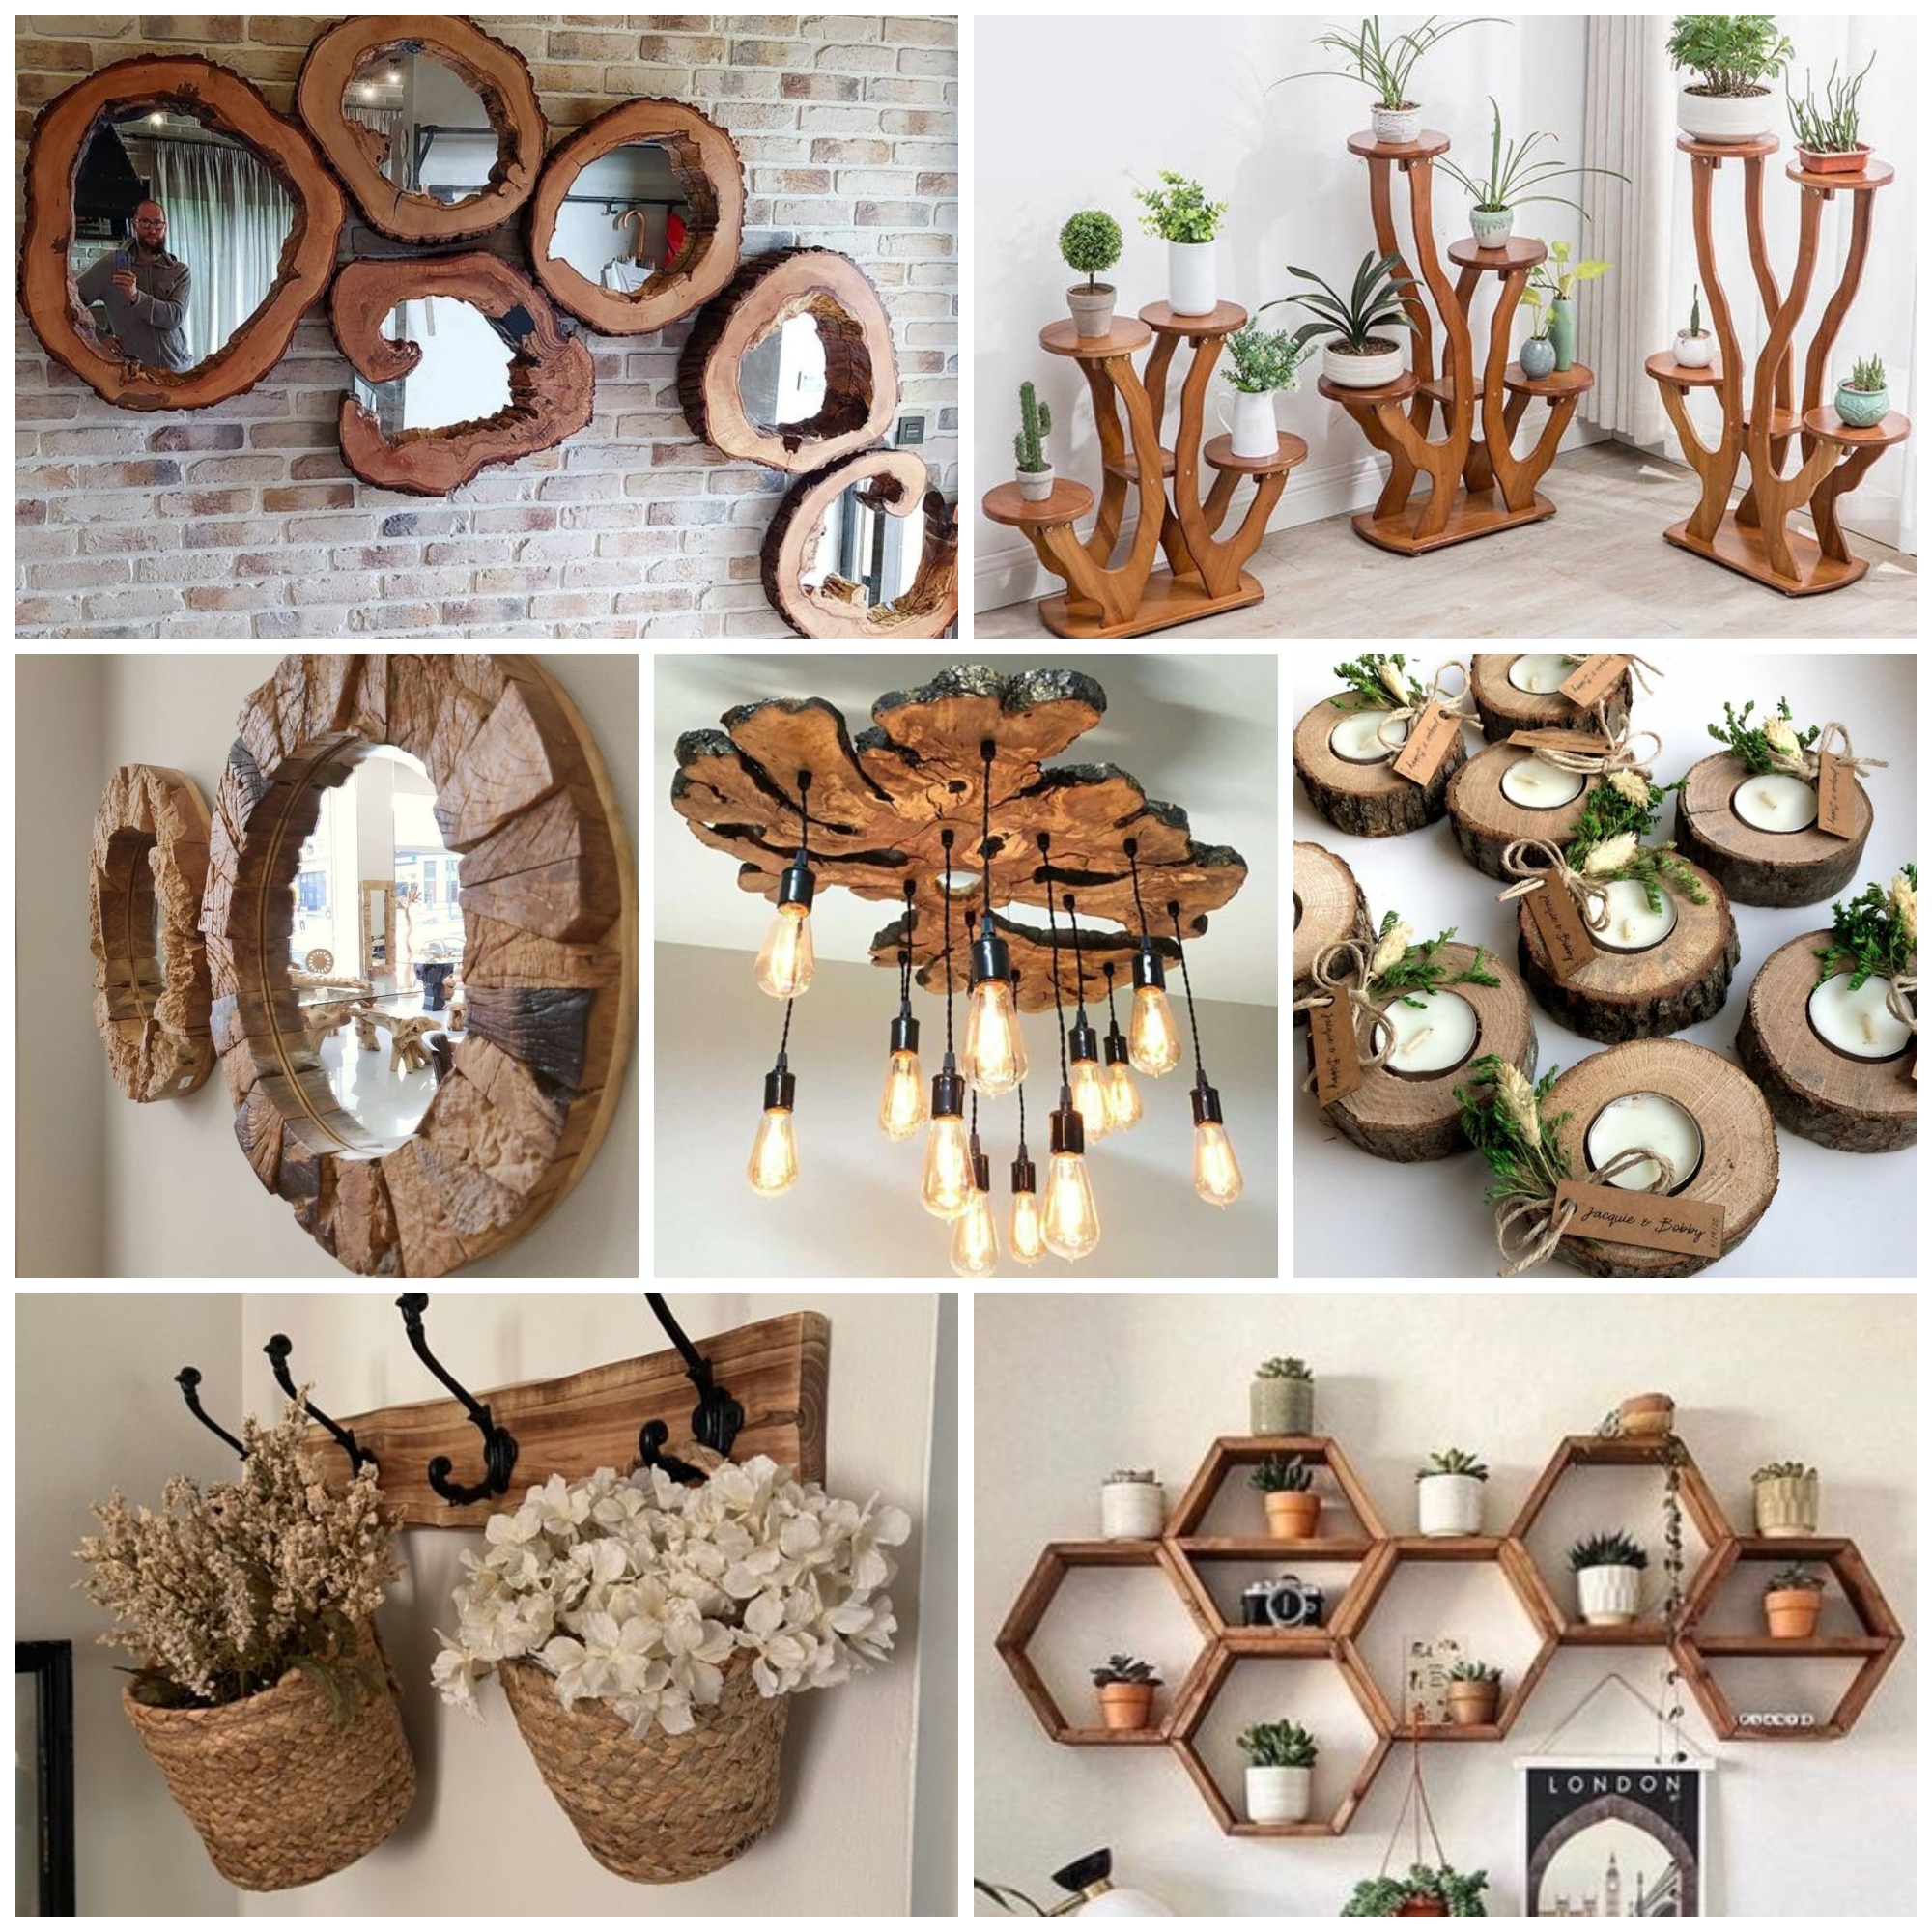 Wooden furniture and wood craft ideas